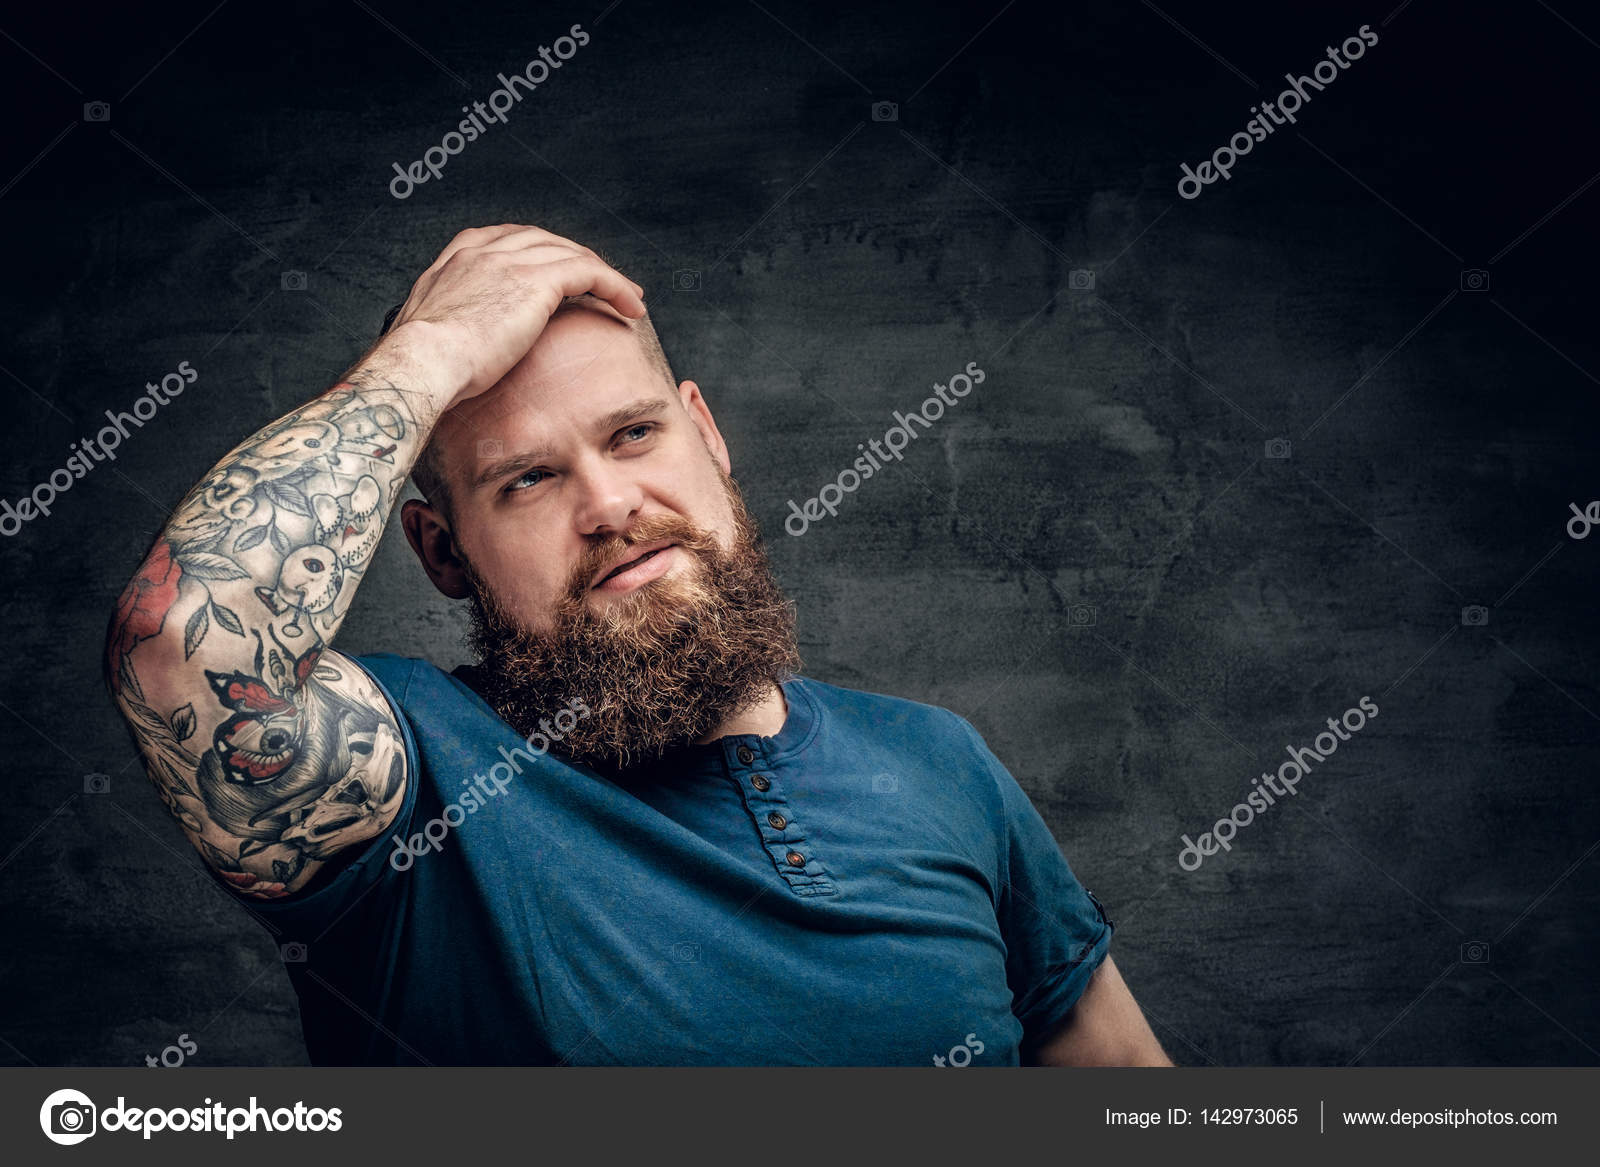 Bearded fat male with tattoos on arm — Stock Photo © fxquadro #142973065